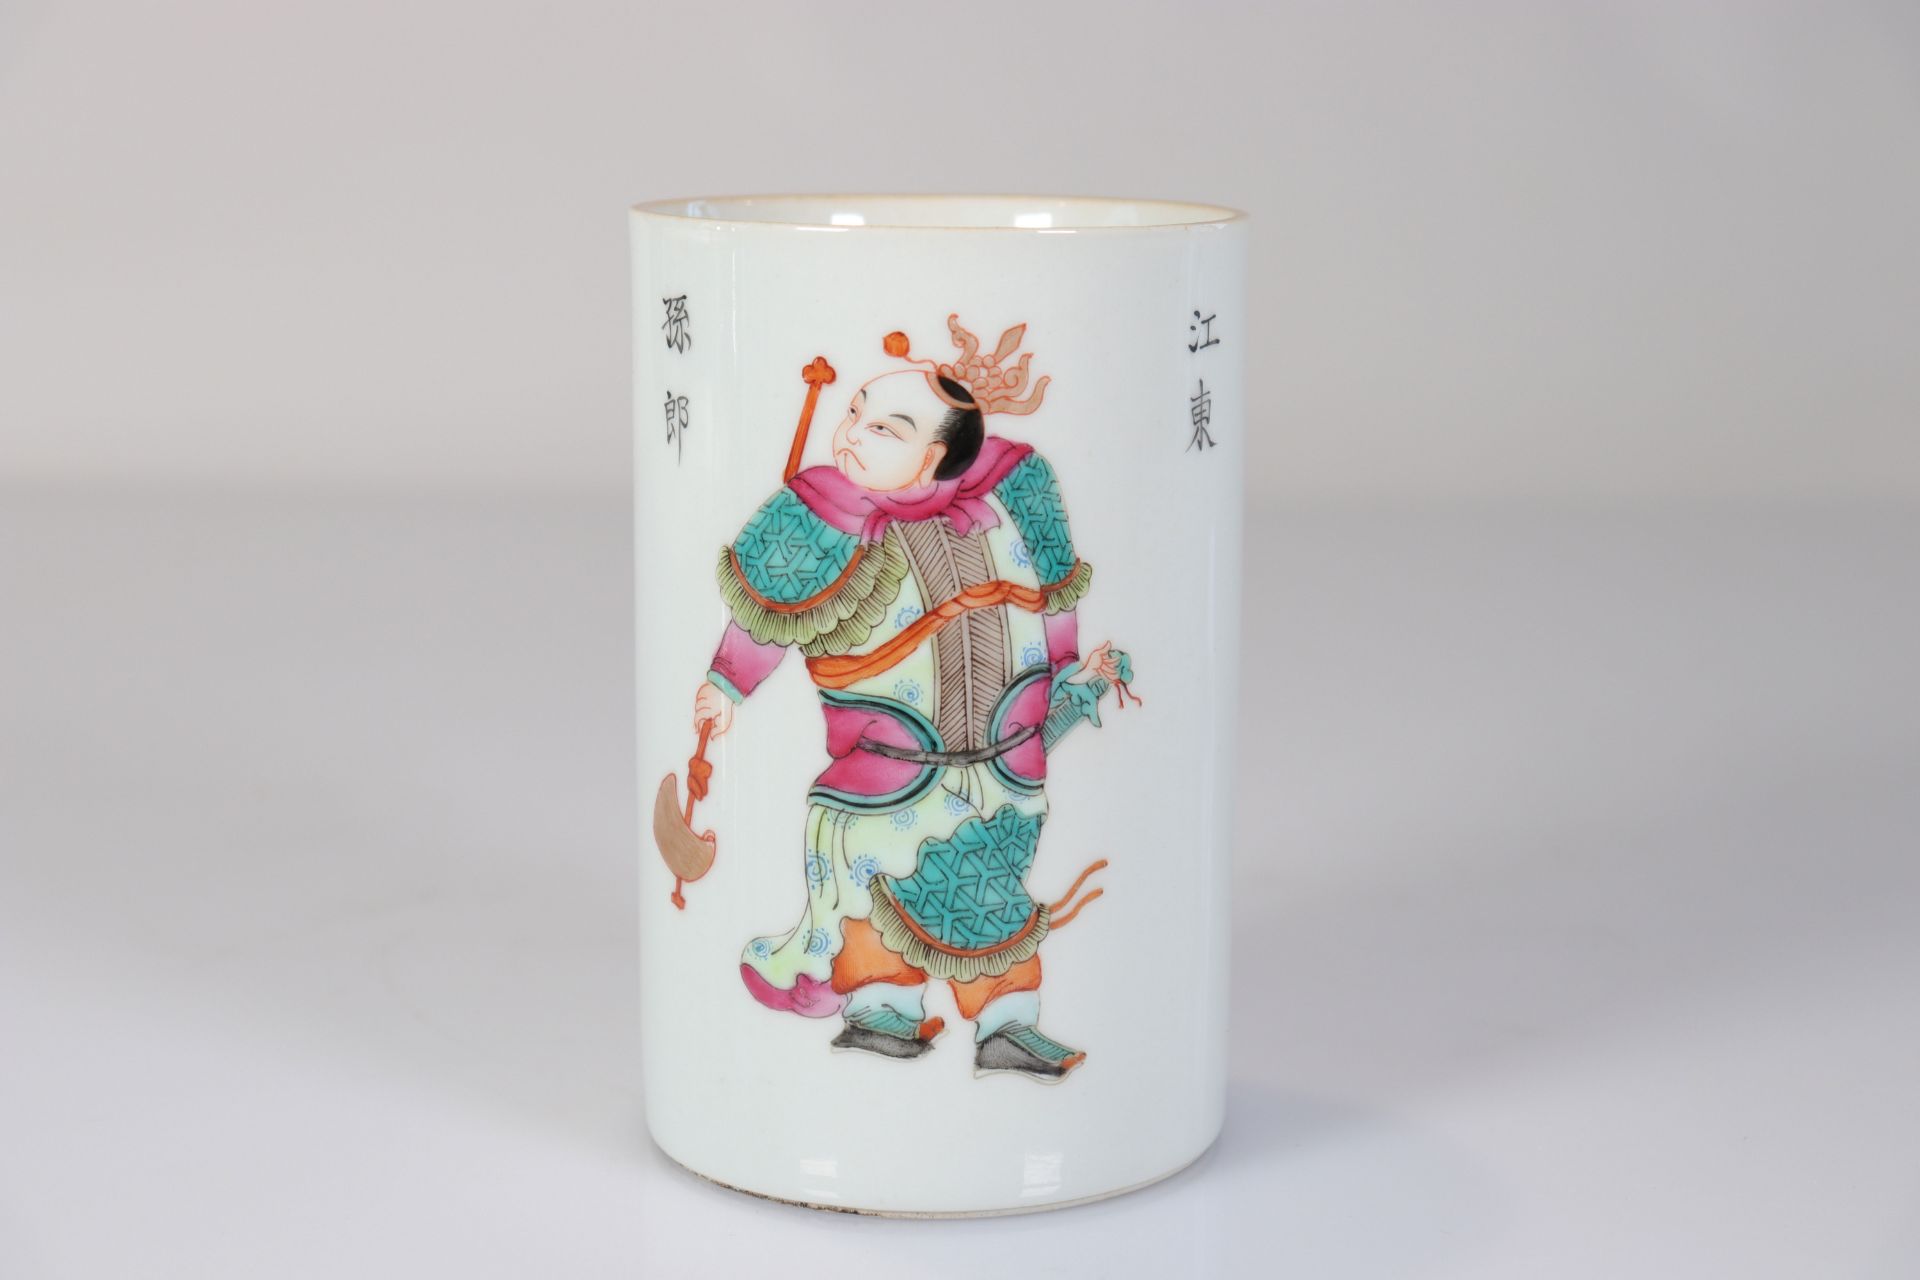 China brush holder decorated with characters